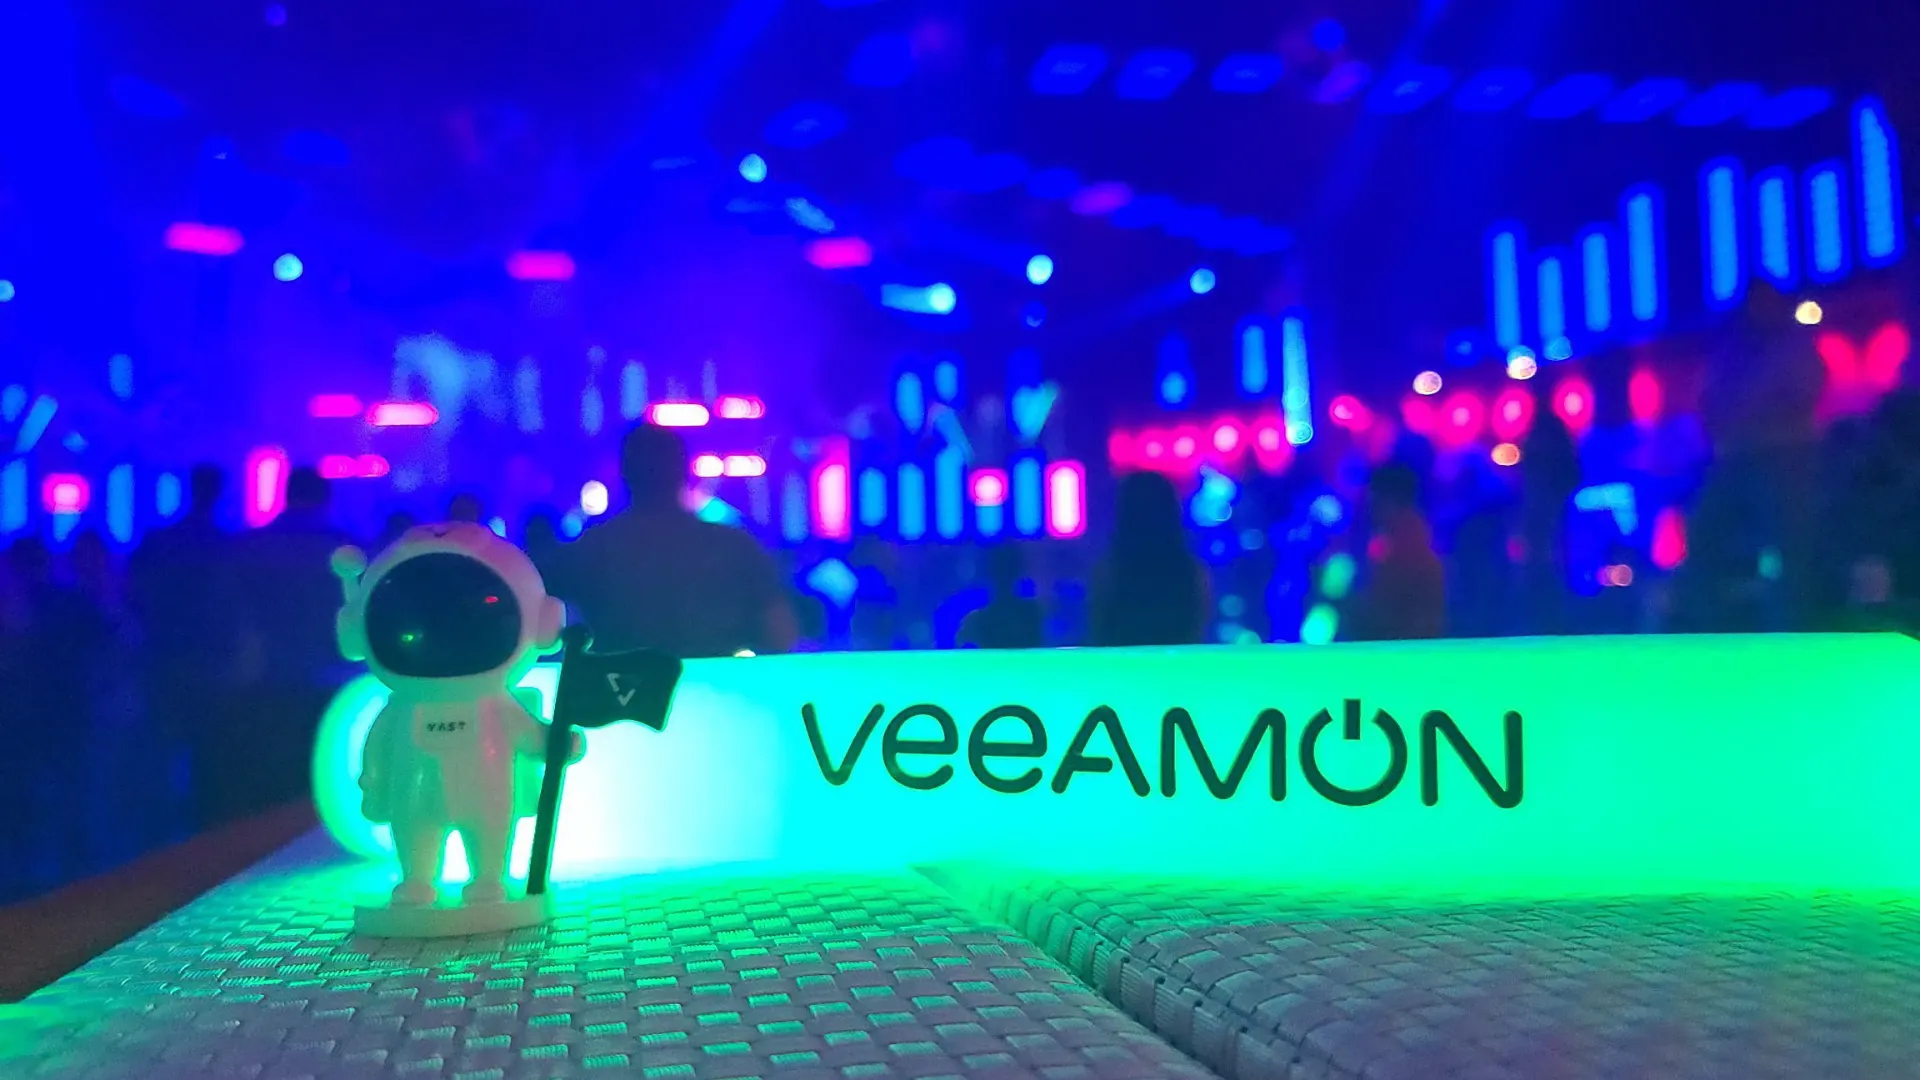 VAST + Veeam: What a Difference a Year Makes